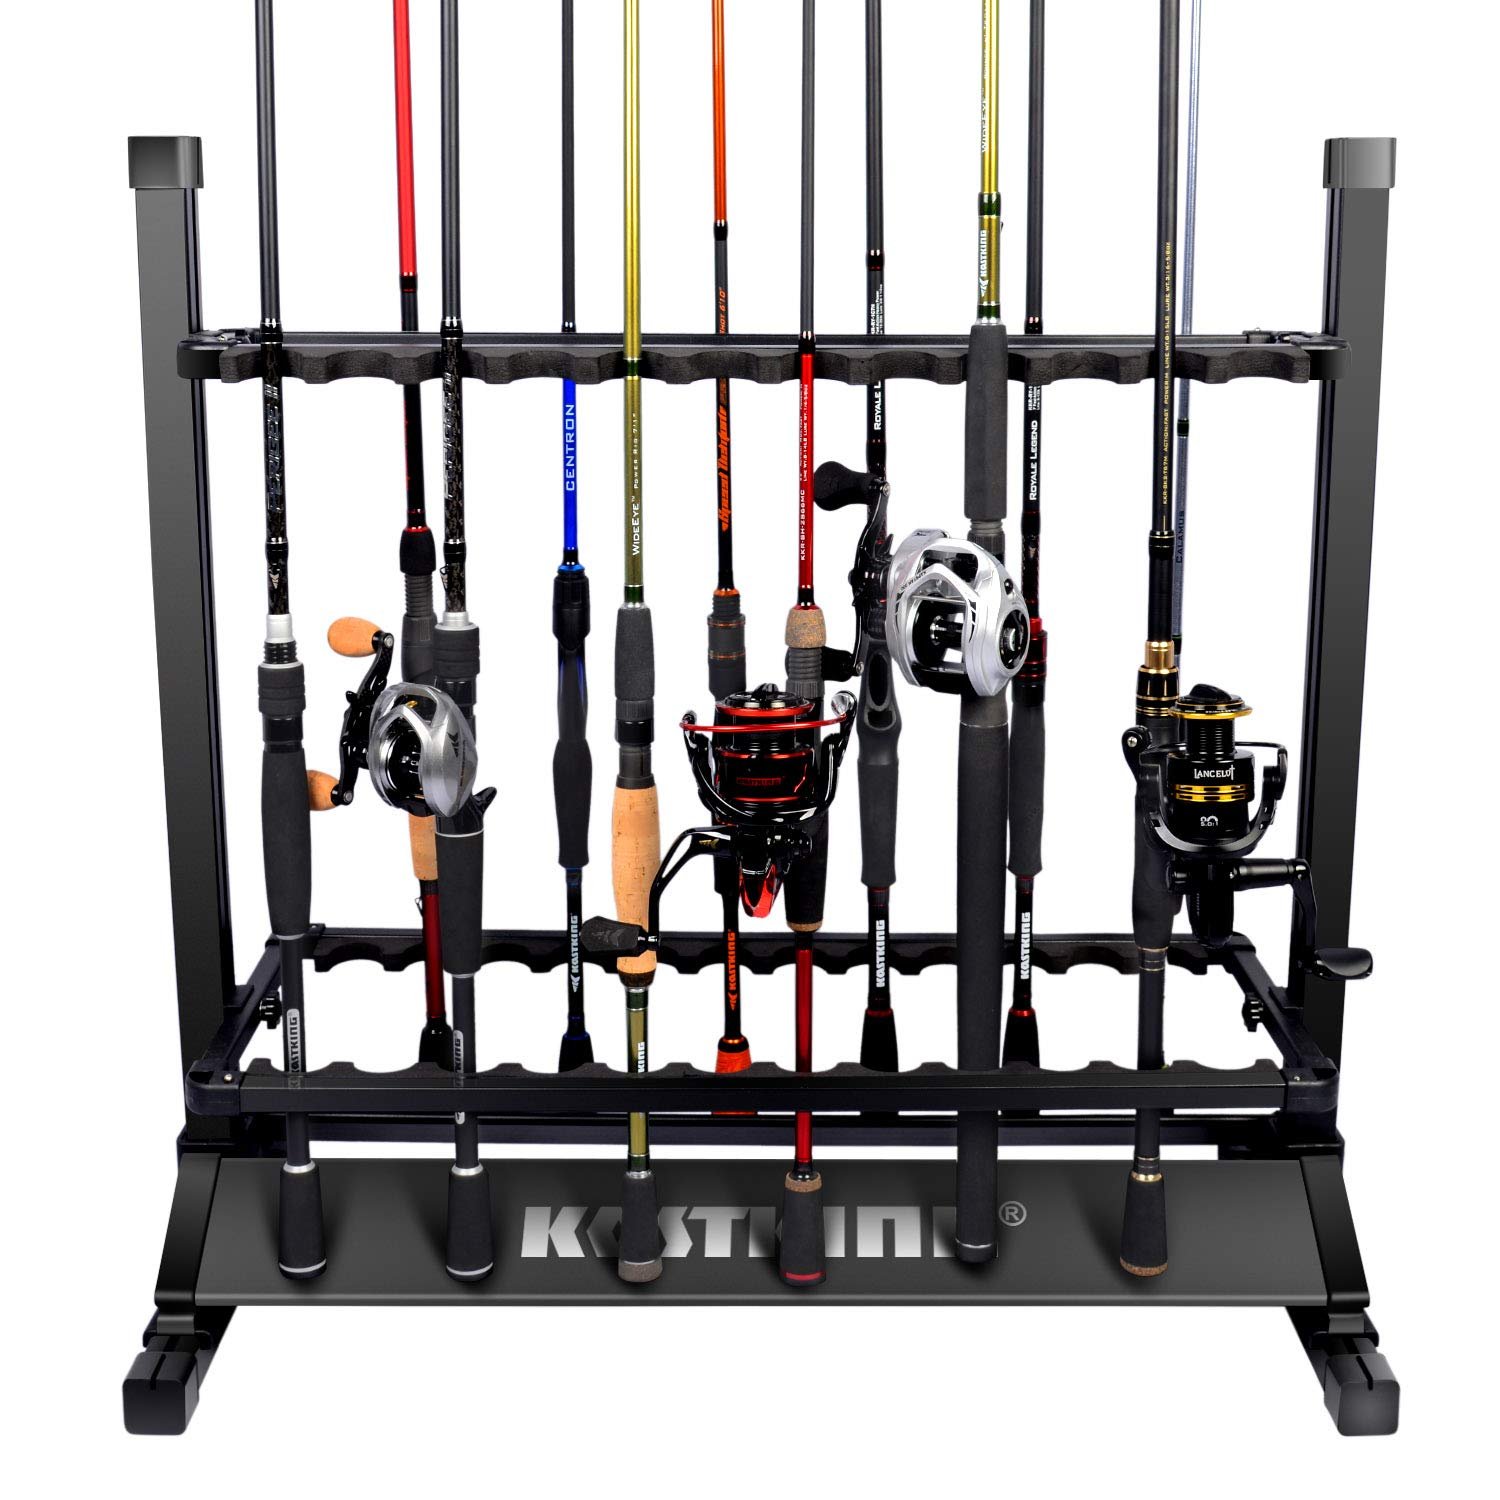 KastKing Fishing Rod Rack Holds Up to 24 Rods